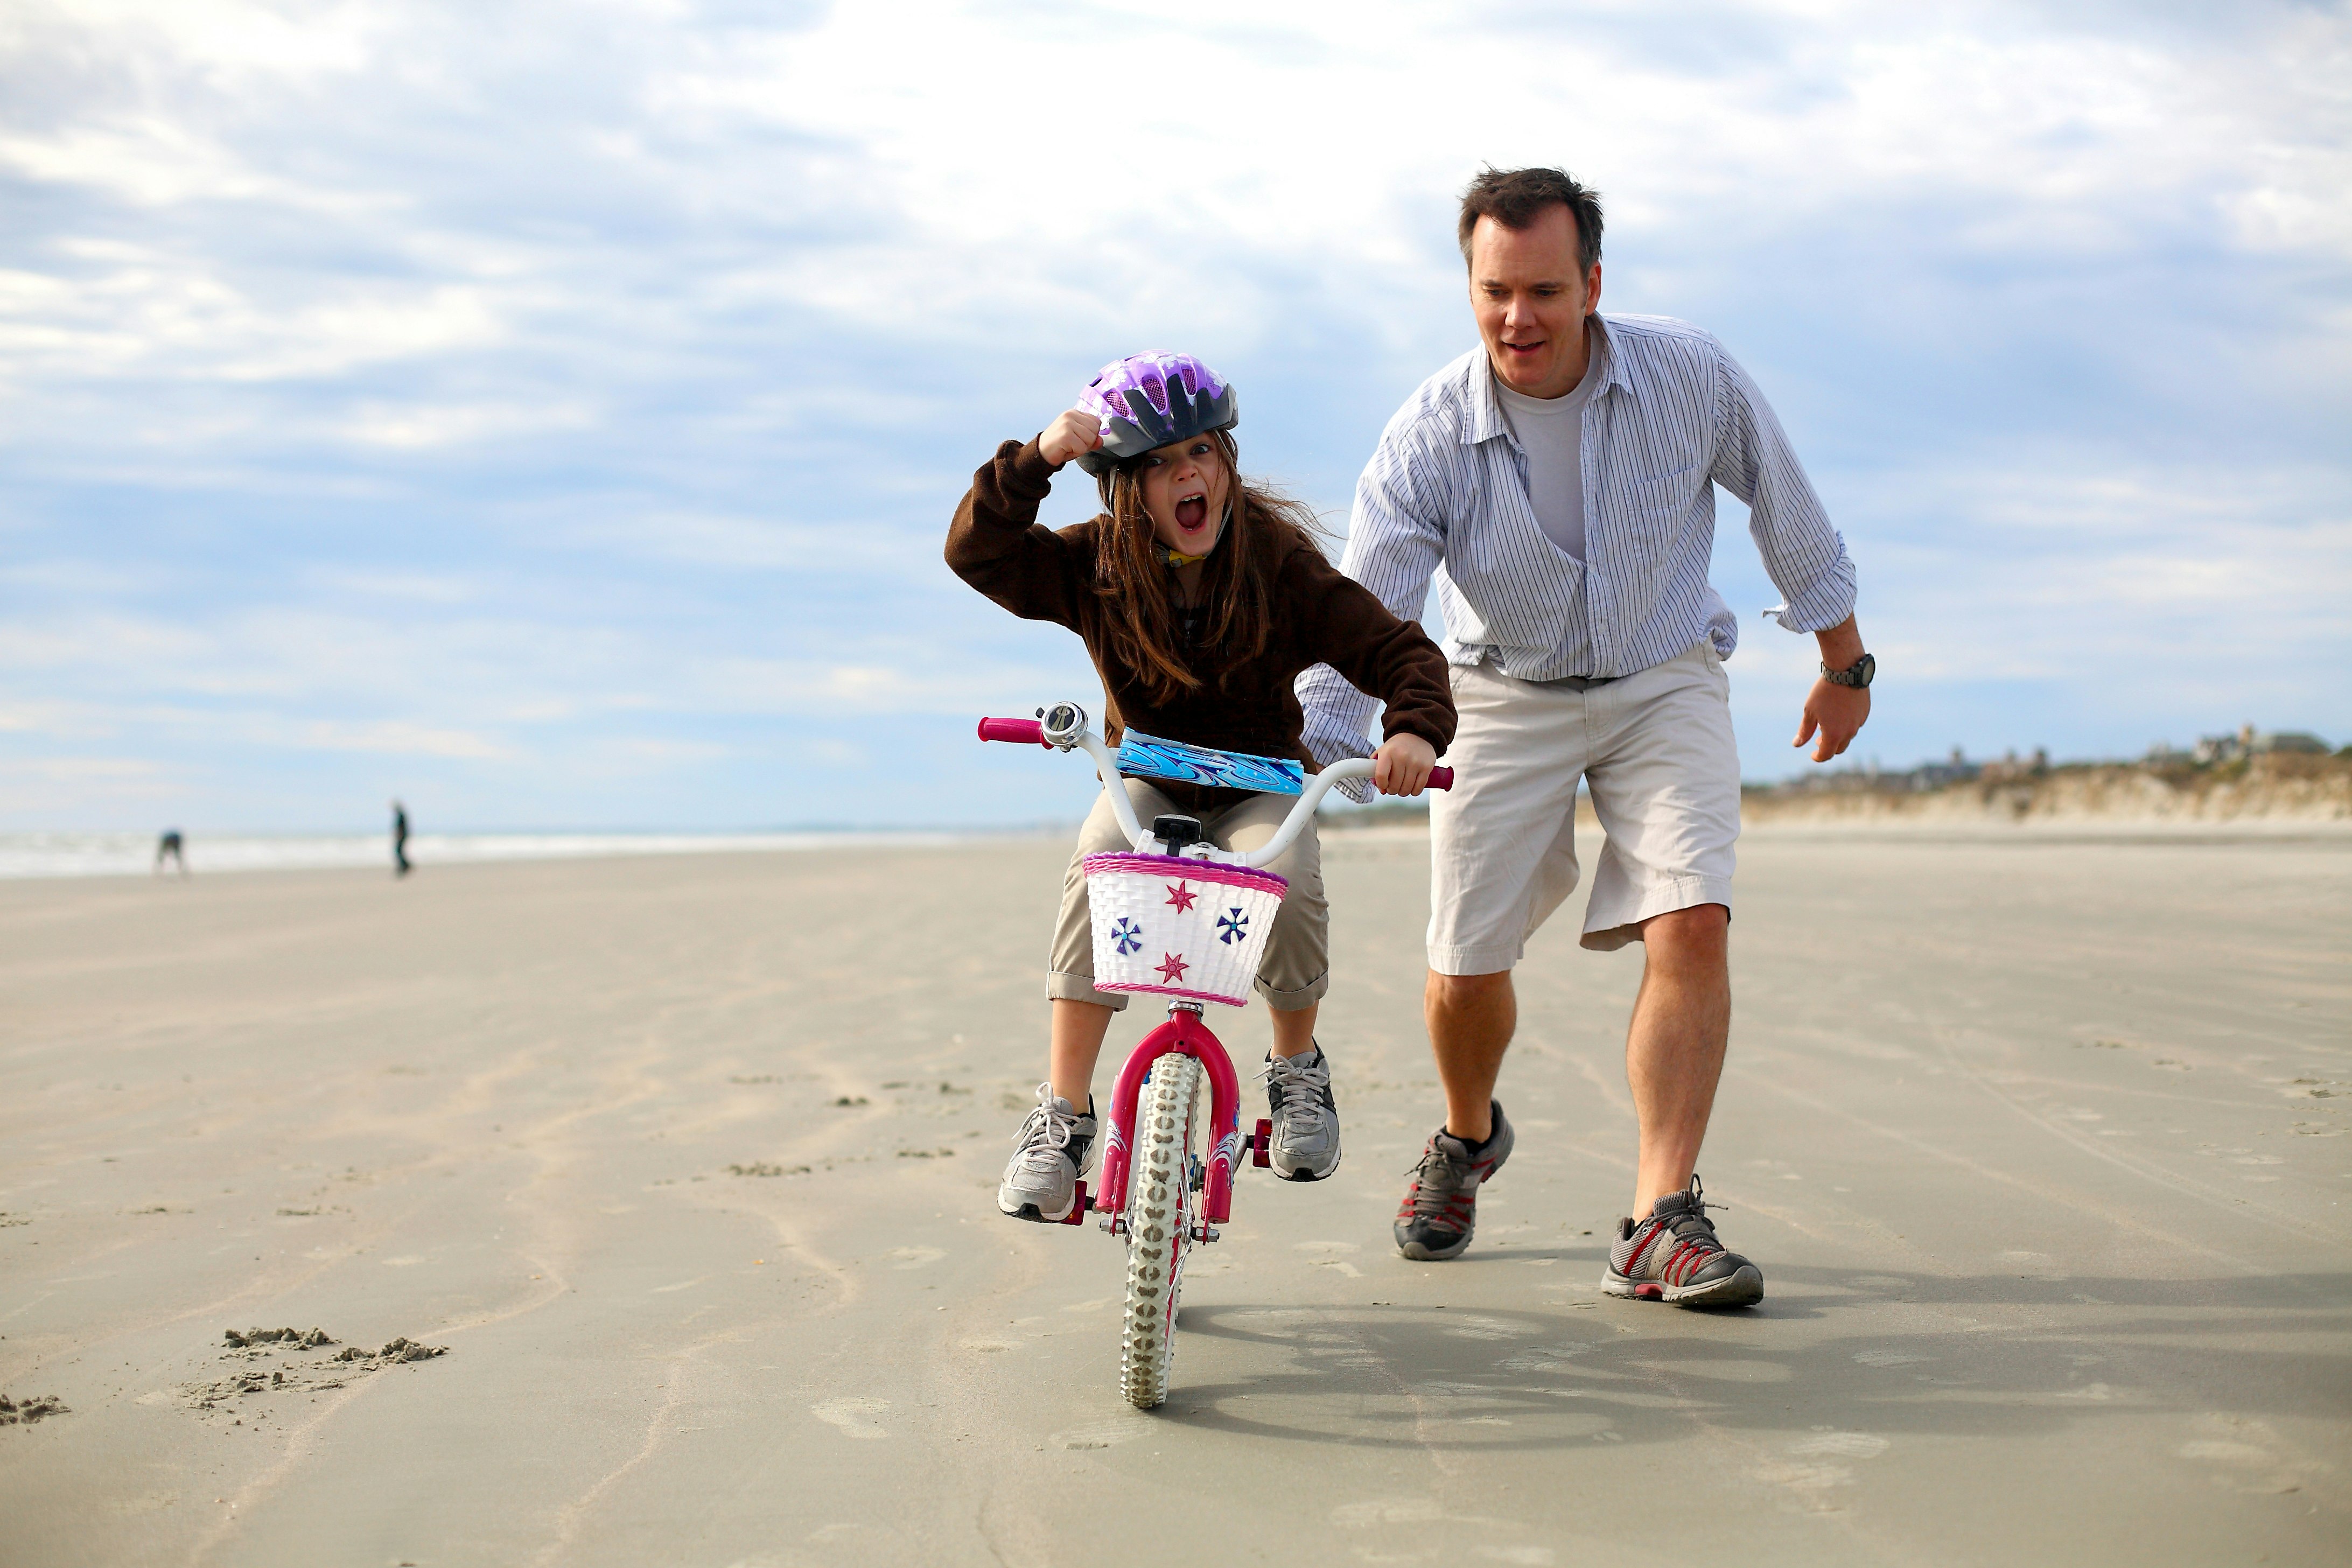 A father and daughter riding a bike on the sand at Kiawah Island, South Carolina 